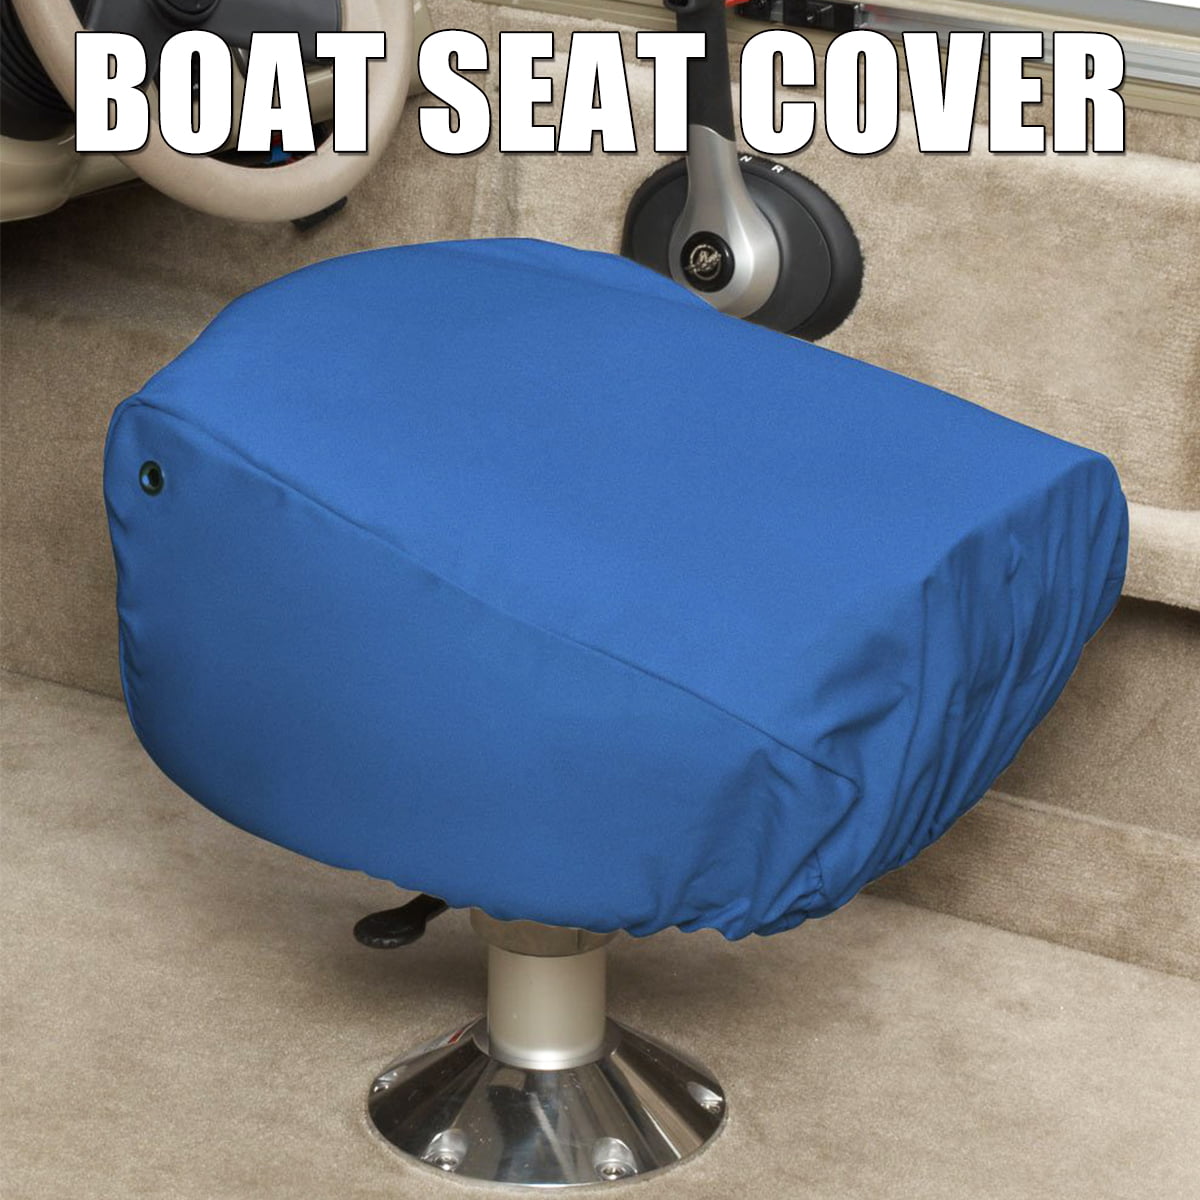 Waterproof Boat Folding Seat Cover Dust Yacht Resistant Vehicle Outdoor  ❤ 